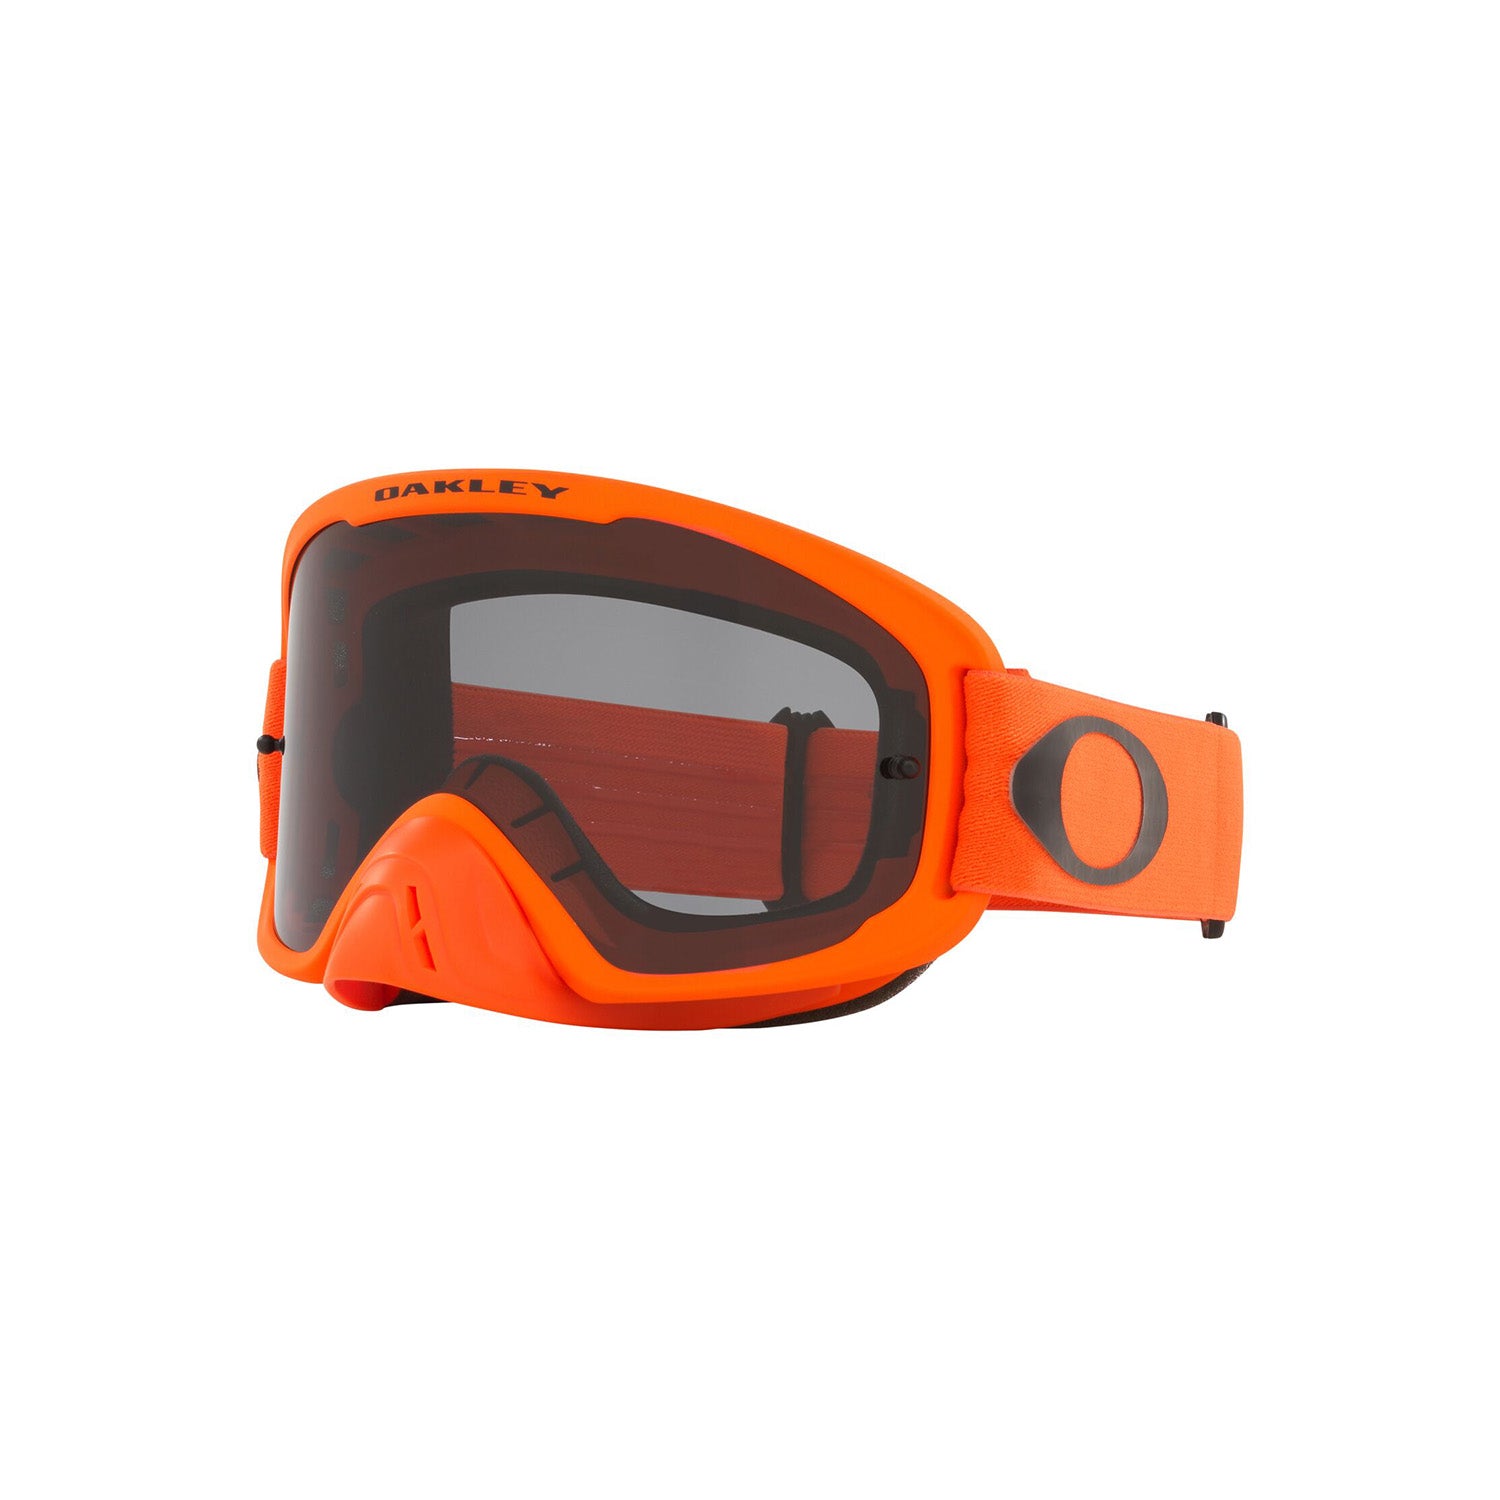 Oakley O Frame 2.0 Pro MX Goggle in Moto Orange with Clear Lens